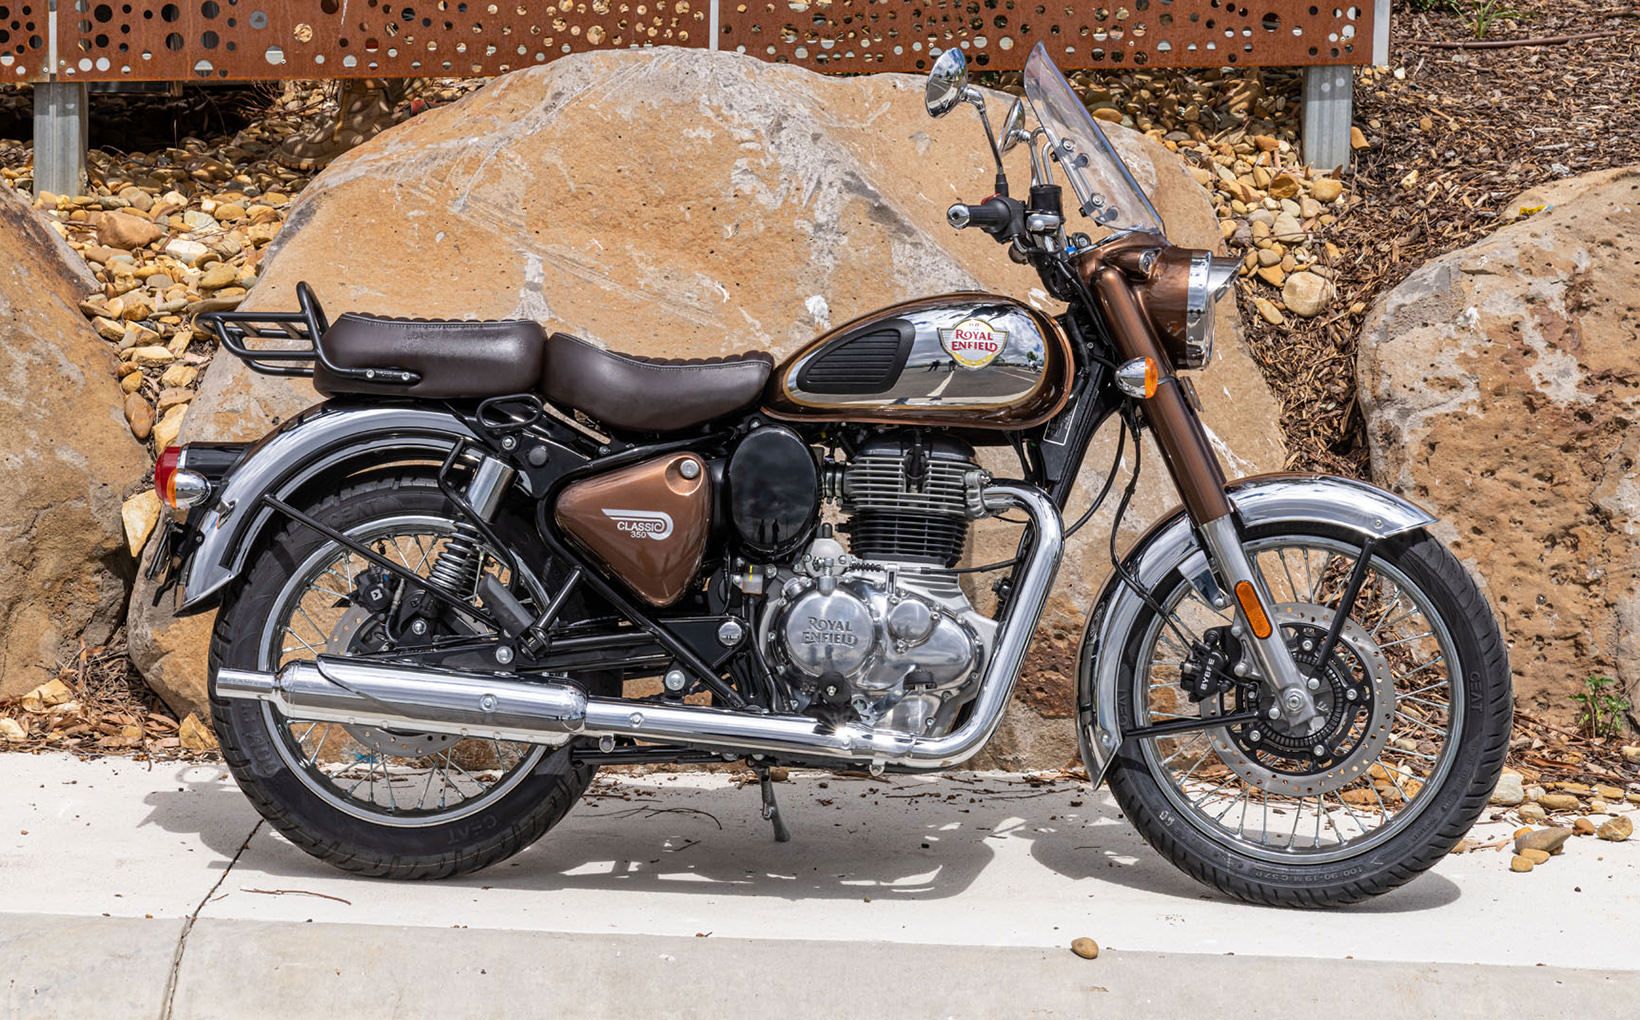 2022 Royal Enfield Classic 350: Classic Lines